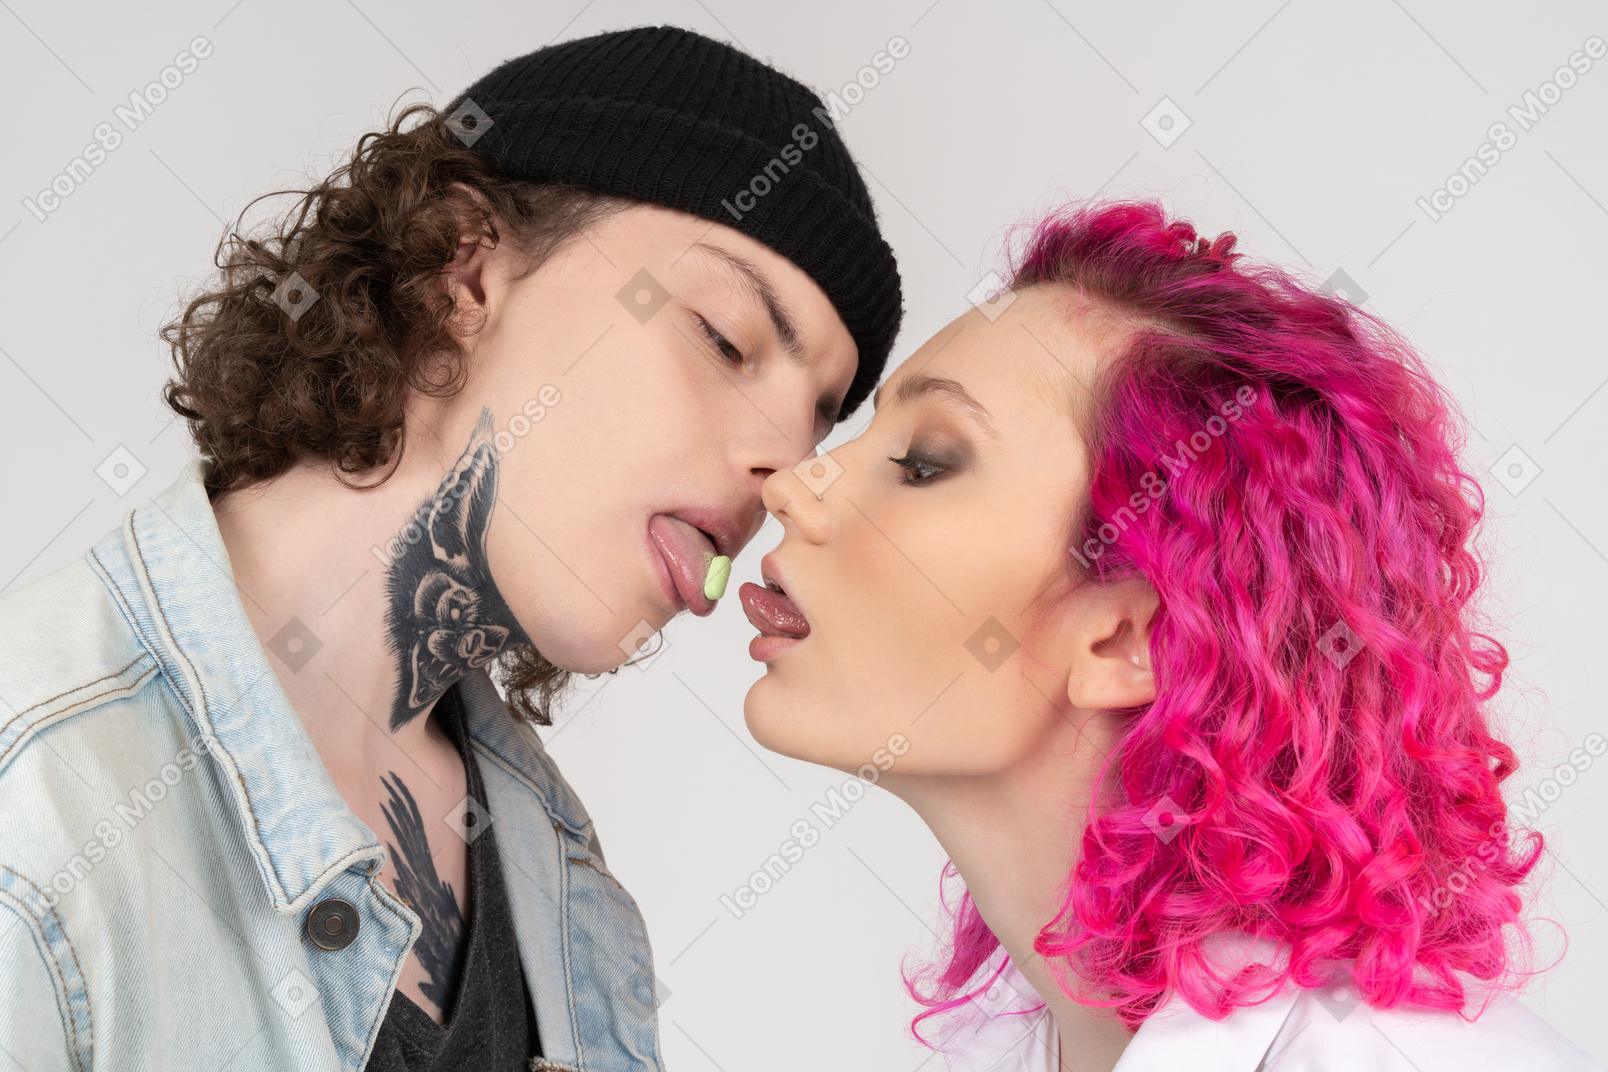 Freak couple passing pill with tongues